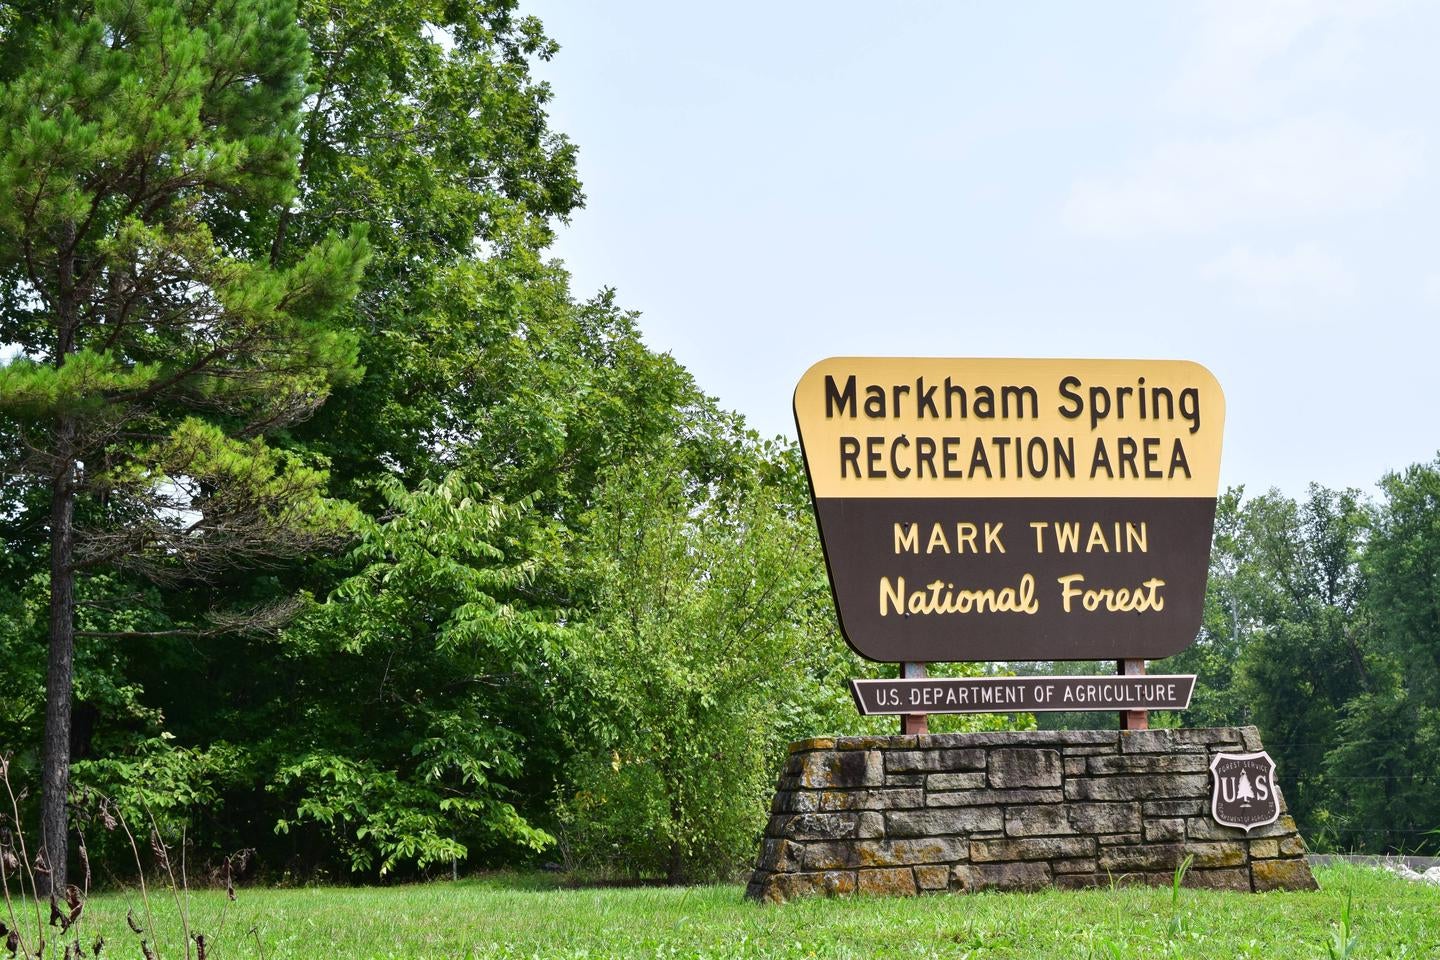 Markham Springs



Entrance to Markham Springs

Credit: Mark Twain National Forest